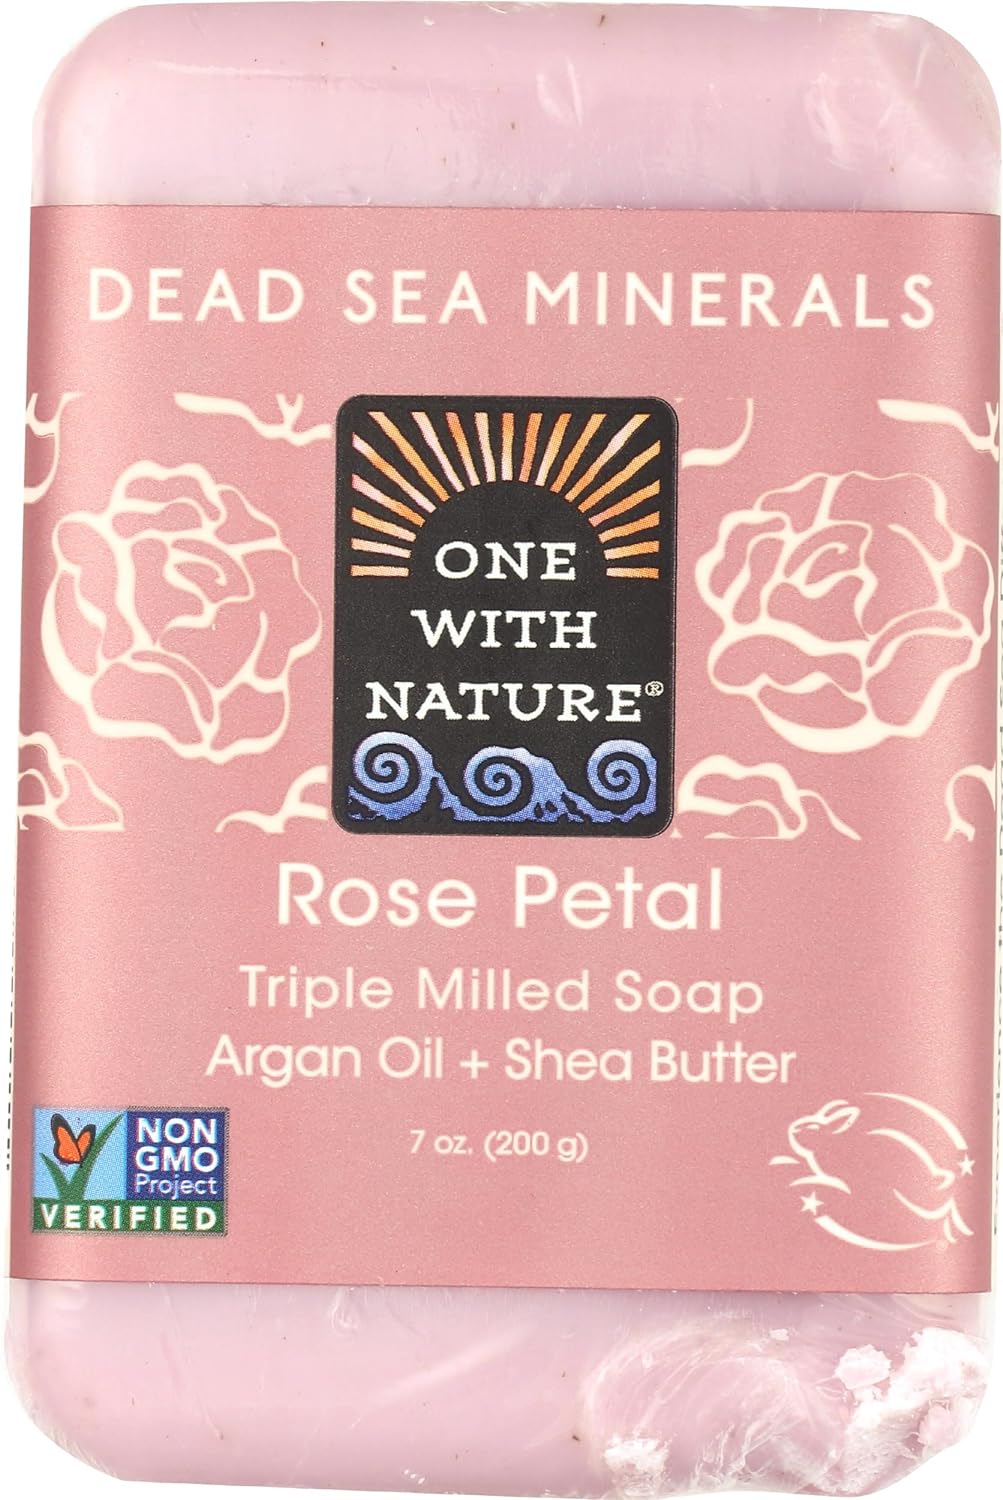 One With Nature Dead Sea Mineral Rose Petal Bar Soap, 7